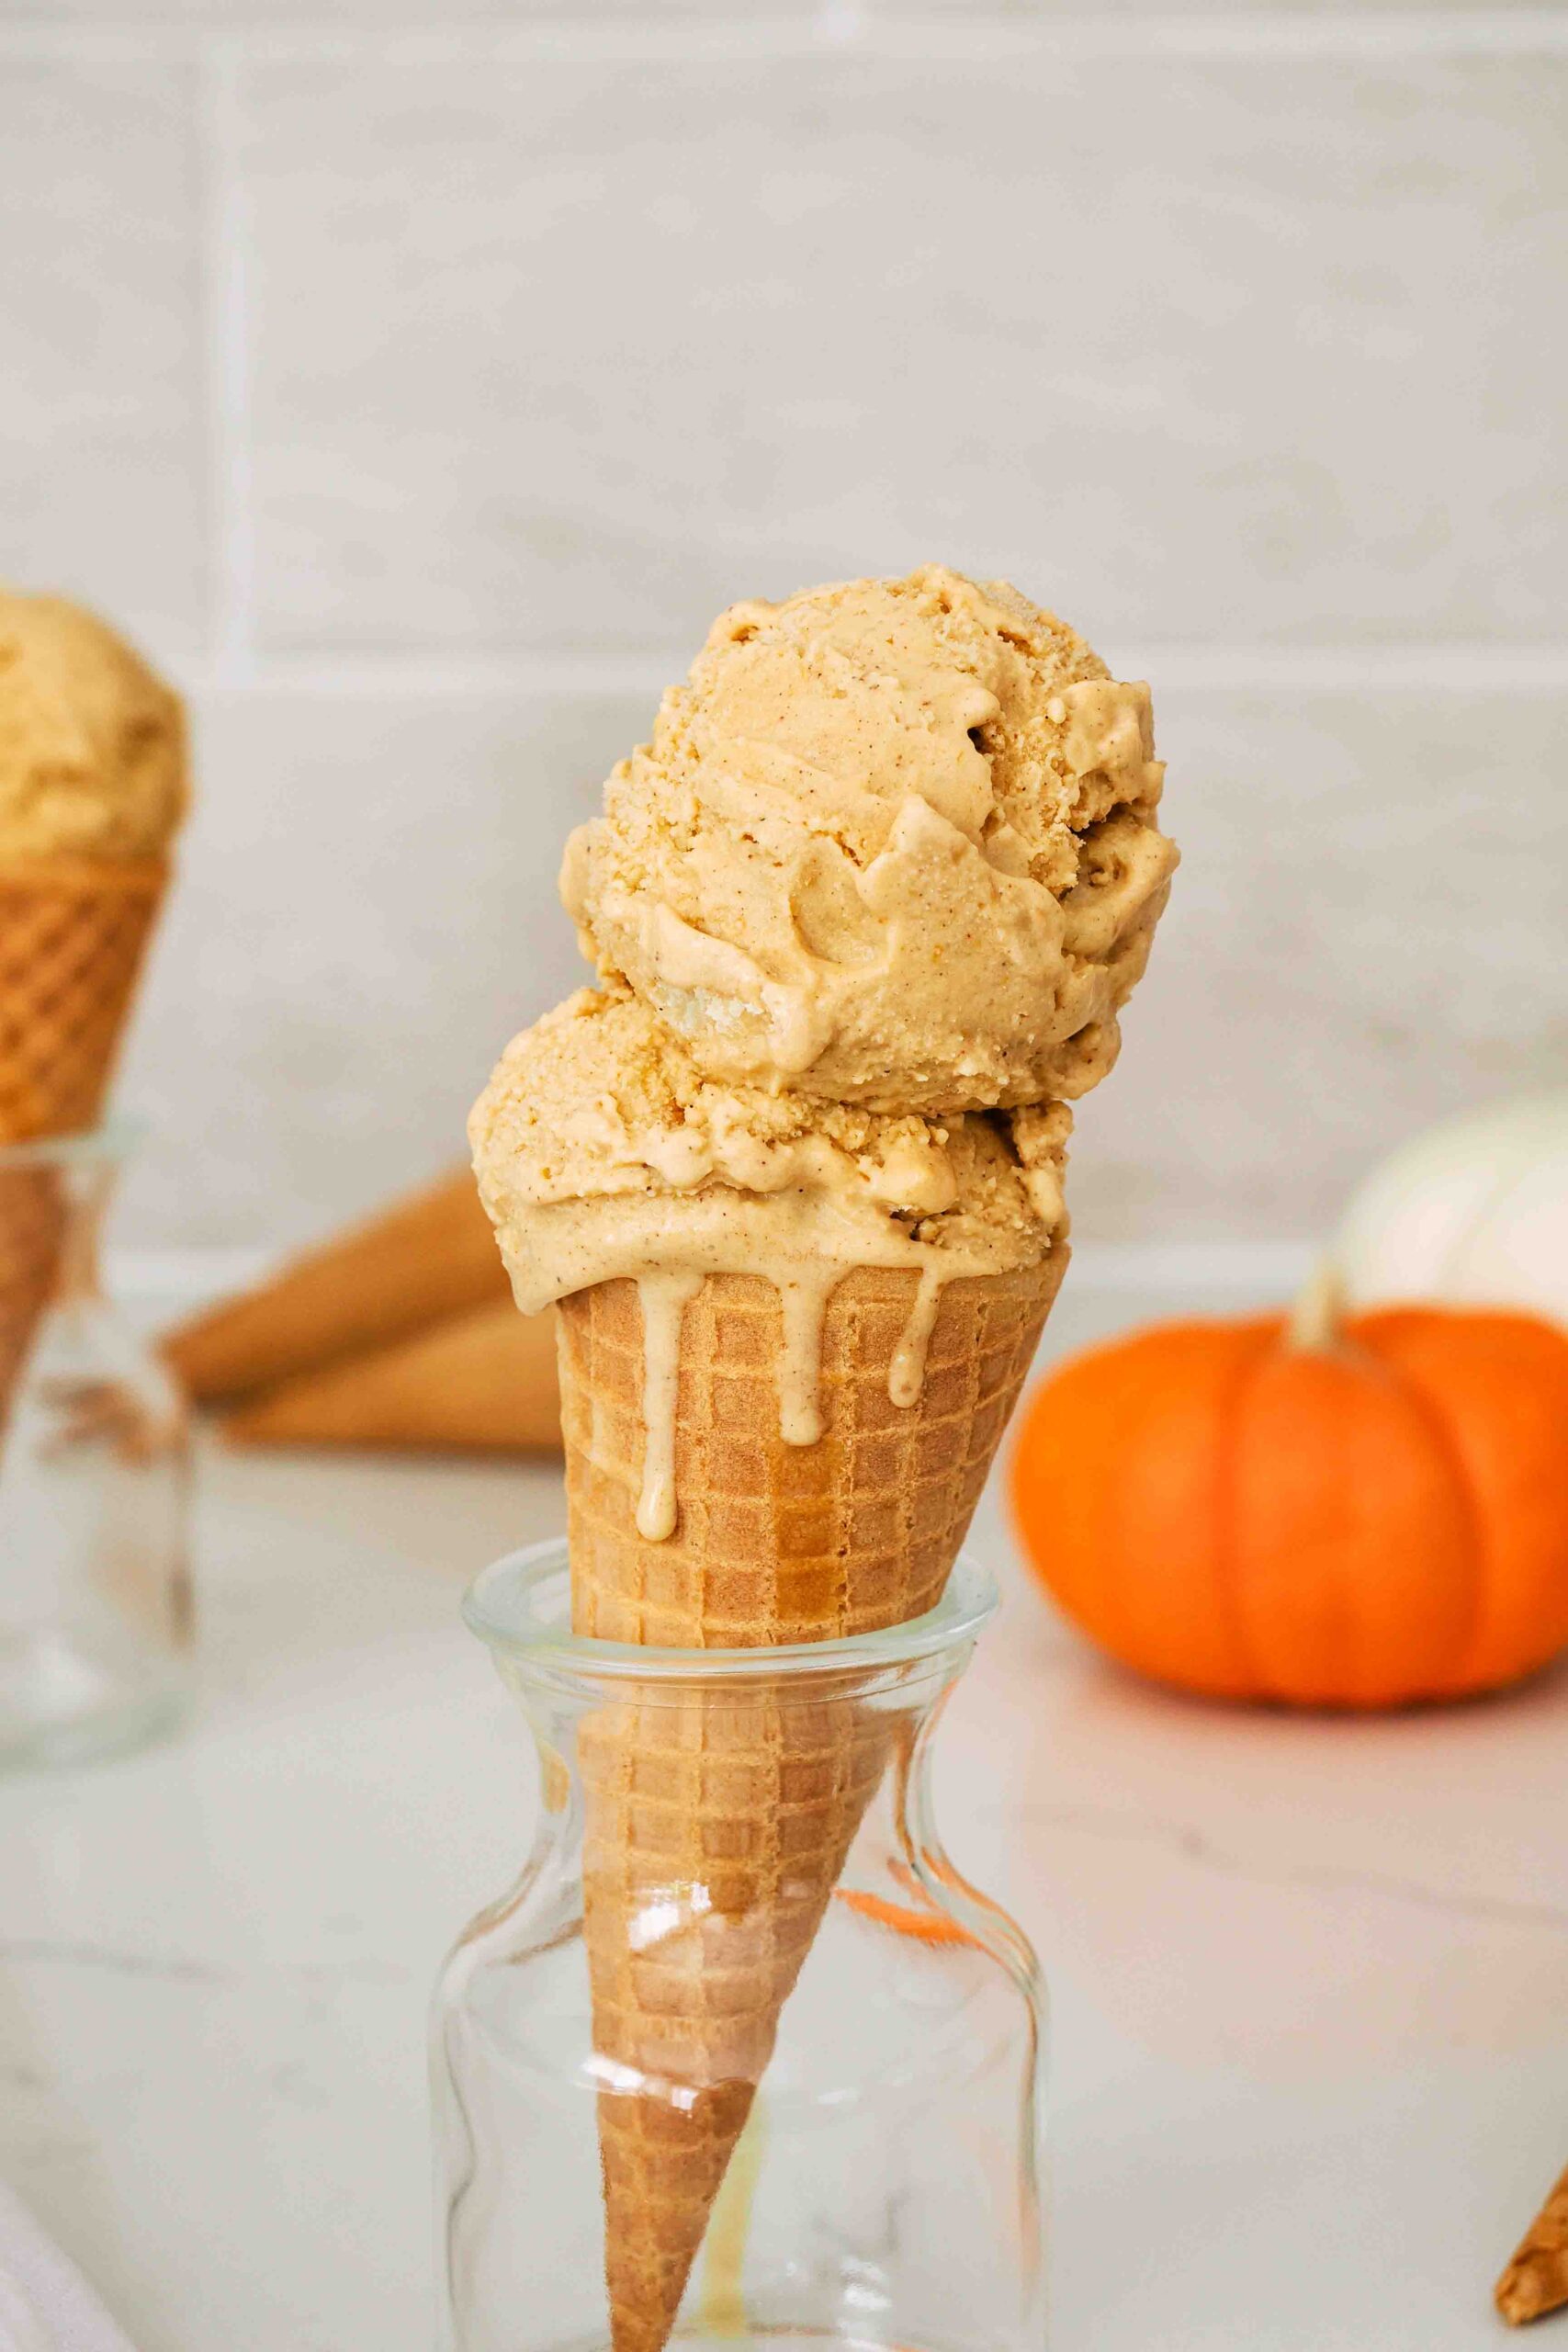 A closeup of an ice cream cone with two scoops of pumpkin pie ice cream.